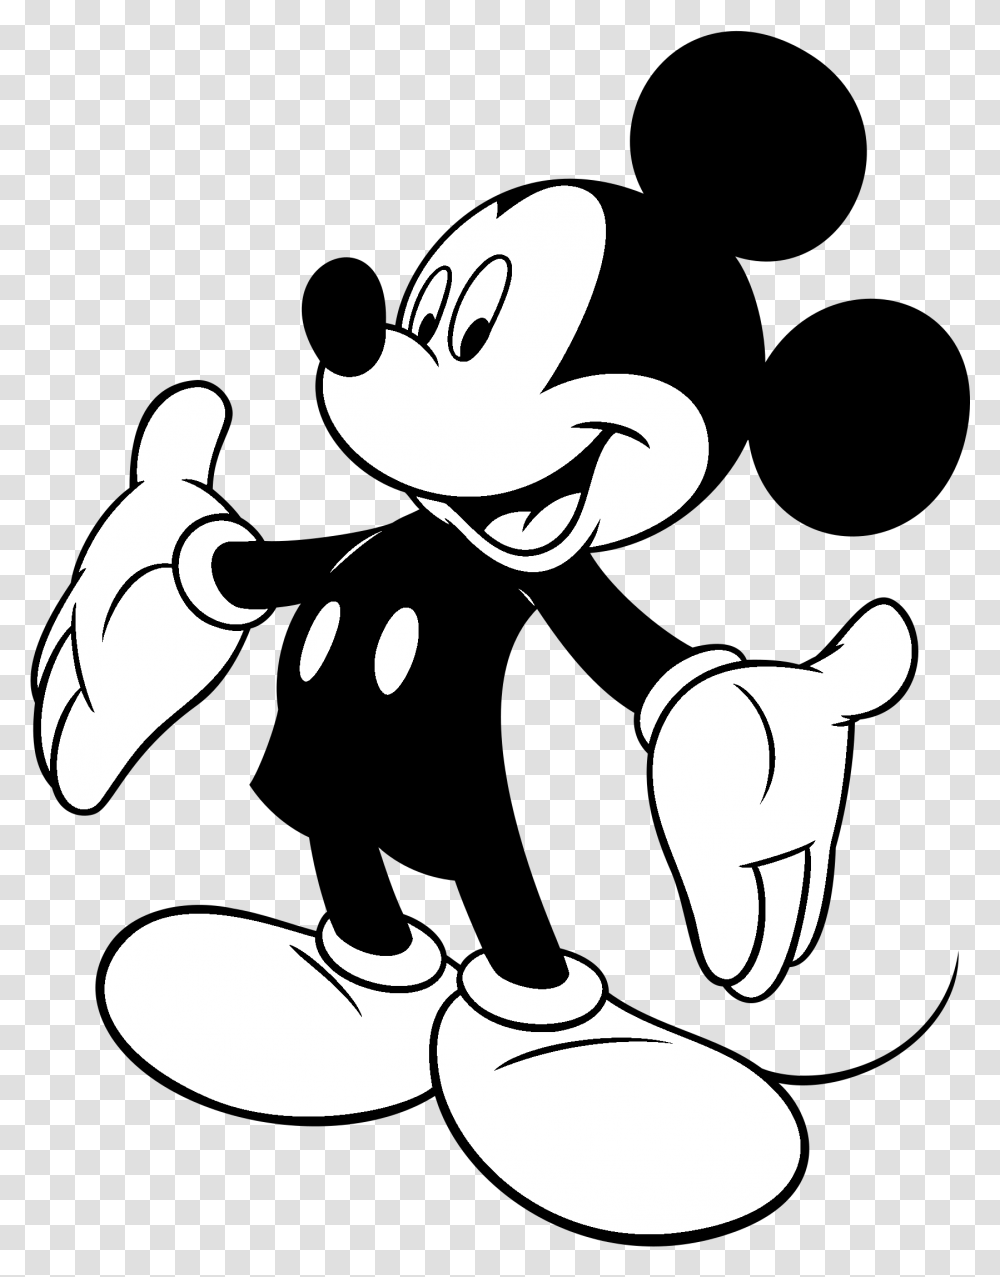 Mickey Mouse Minnie Mouse Scalable Vector Graphics Mickey Mouse Sticker, Stencil Transparent Png